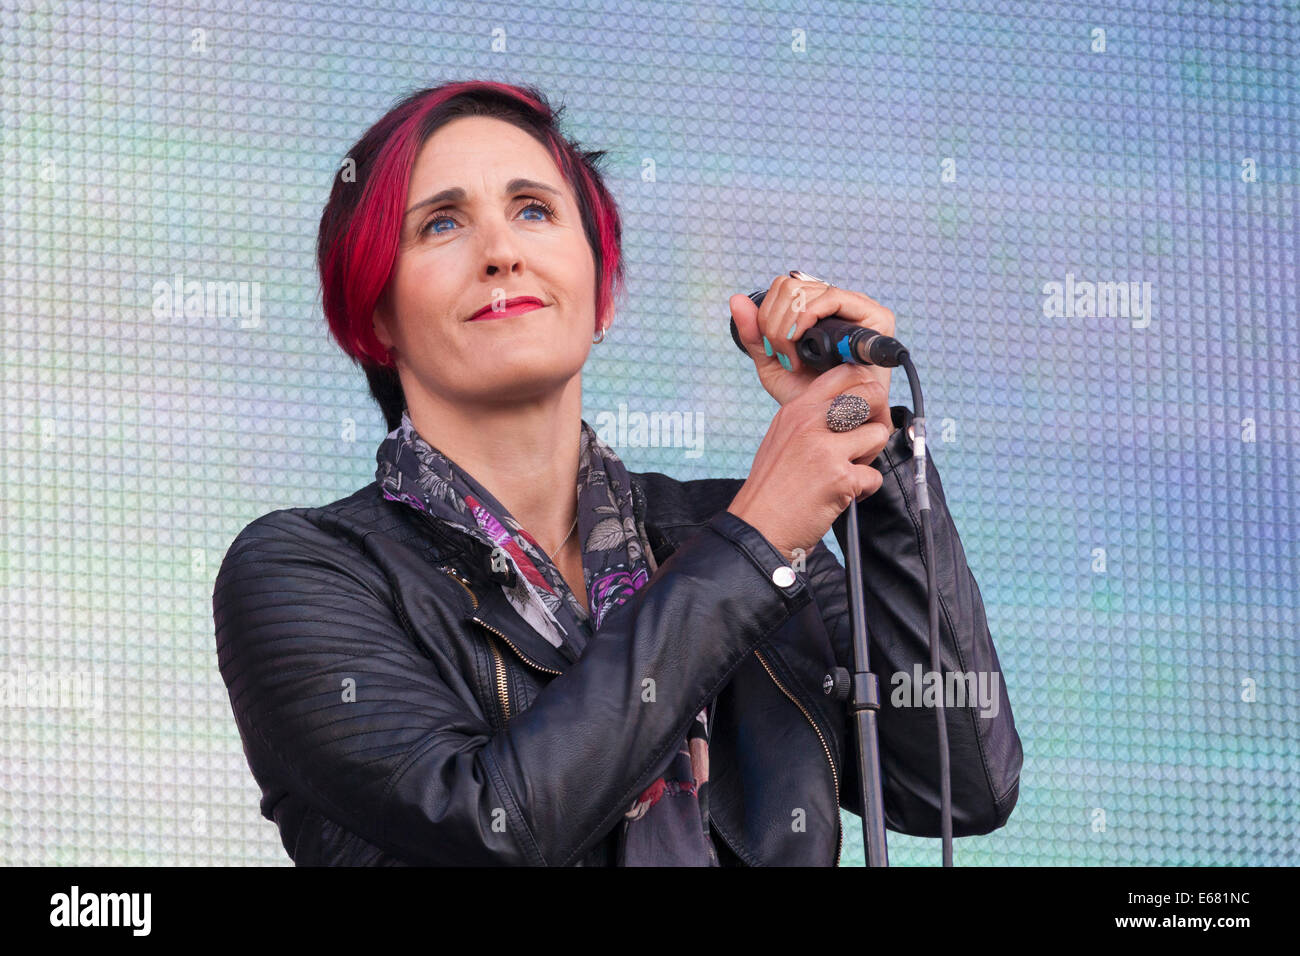 Remenham Henley-on-Thames Oxfordshire UK. 17 August 2014. Singer ALISON WHEELER of the group The (Beautiful) South performs on-stage at the 2014 'Rewind South Festival' held 15-16-17 August 2014. Photograph Credit:  2014 John Henshall / Alamy Live News. PER0404 Stock Photo